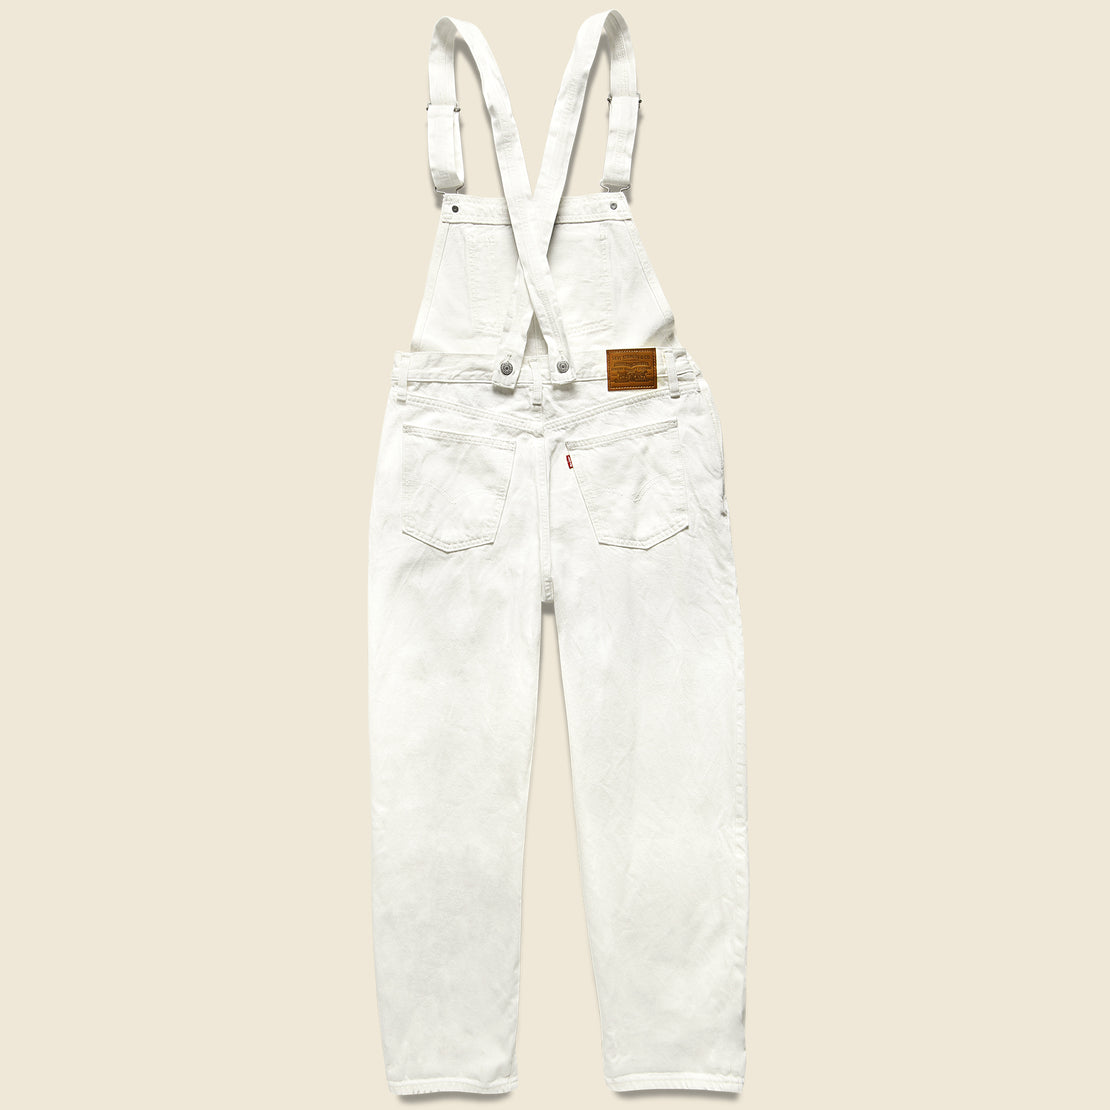 Baggy Overall - Clean Sweep - Levis Premium - STAG Provisions - W - Onepiece - Overalls